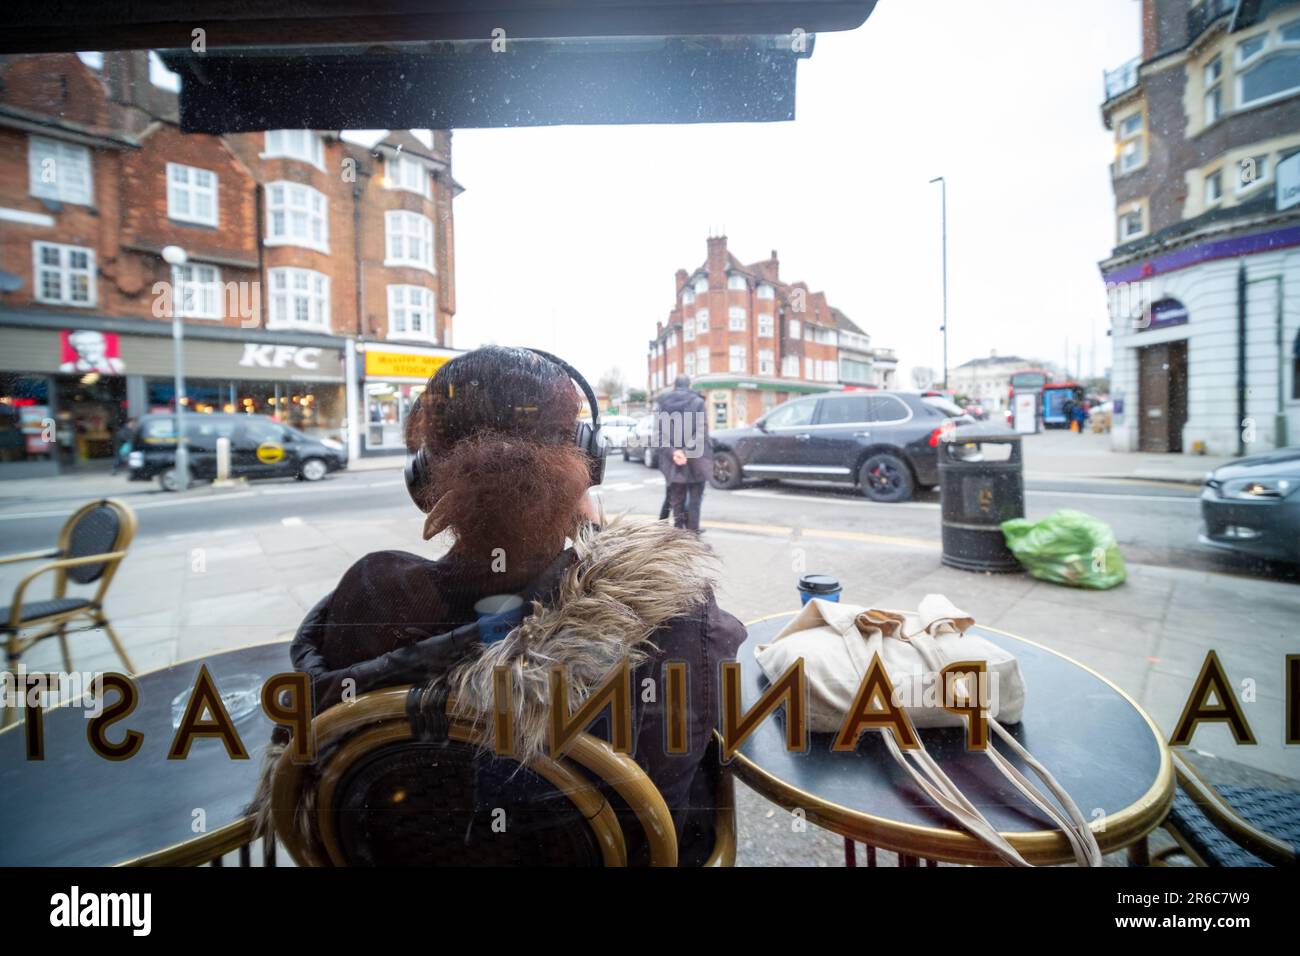 London- March 2023: High street shop in Golders Green, an area of North London with a large Jewish population Stock Photo